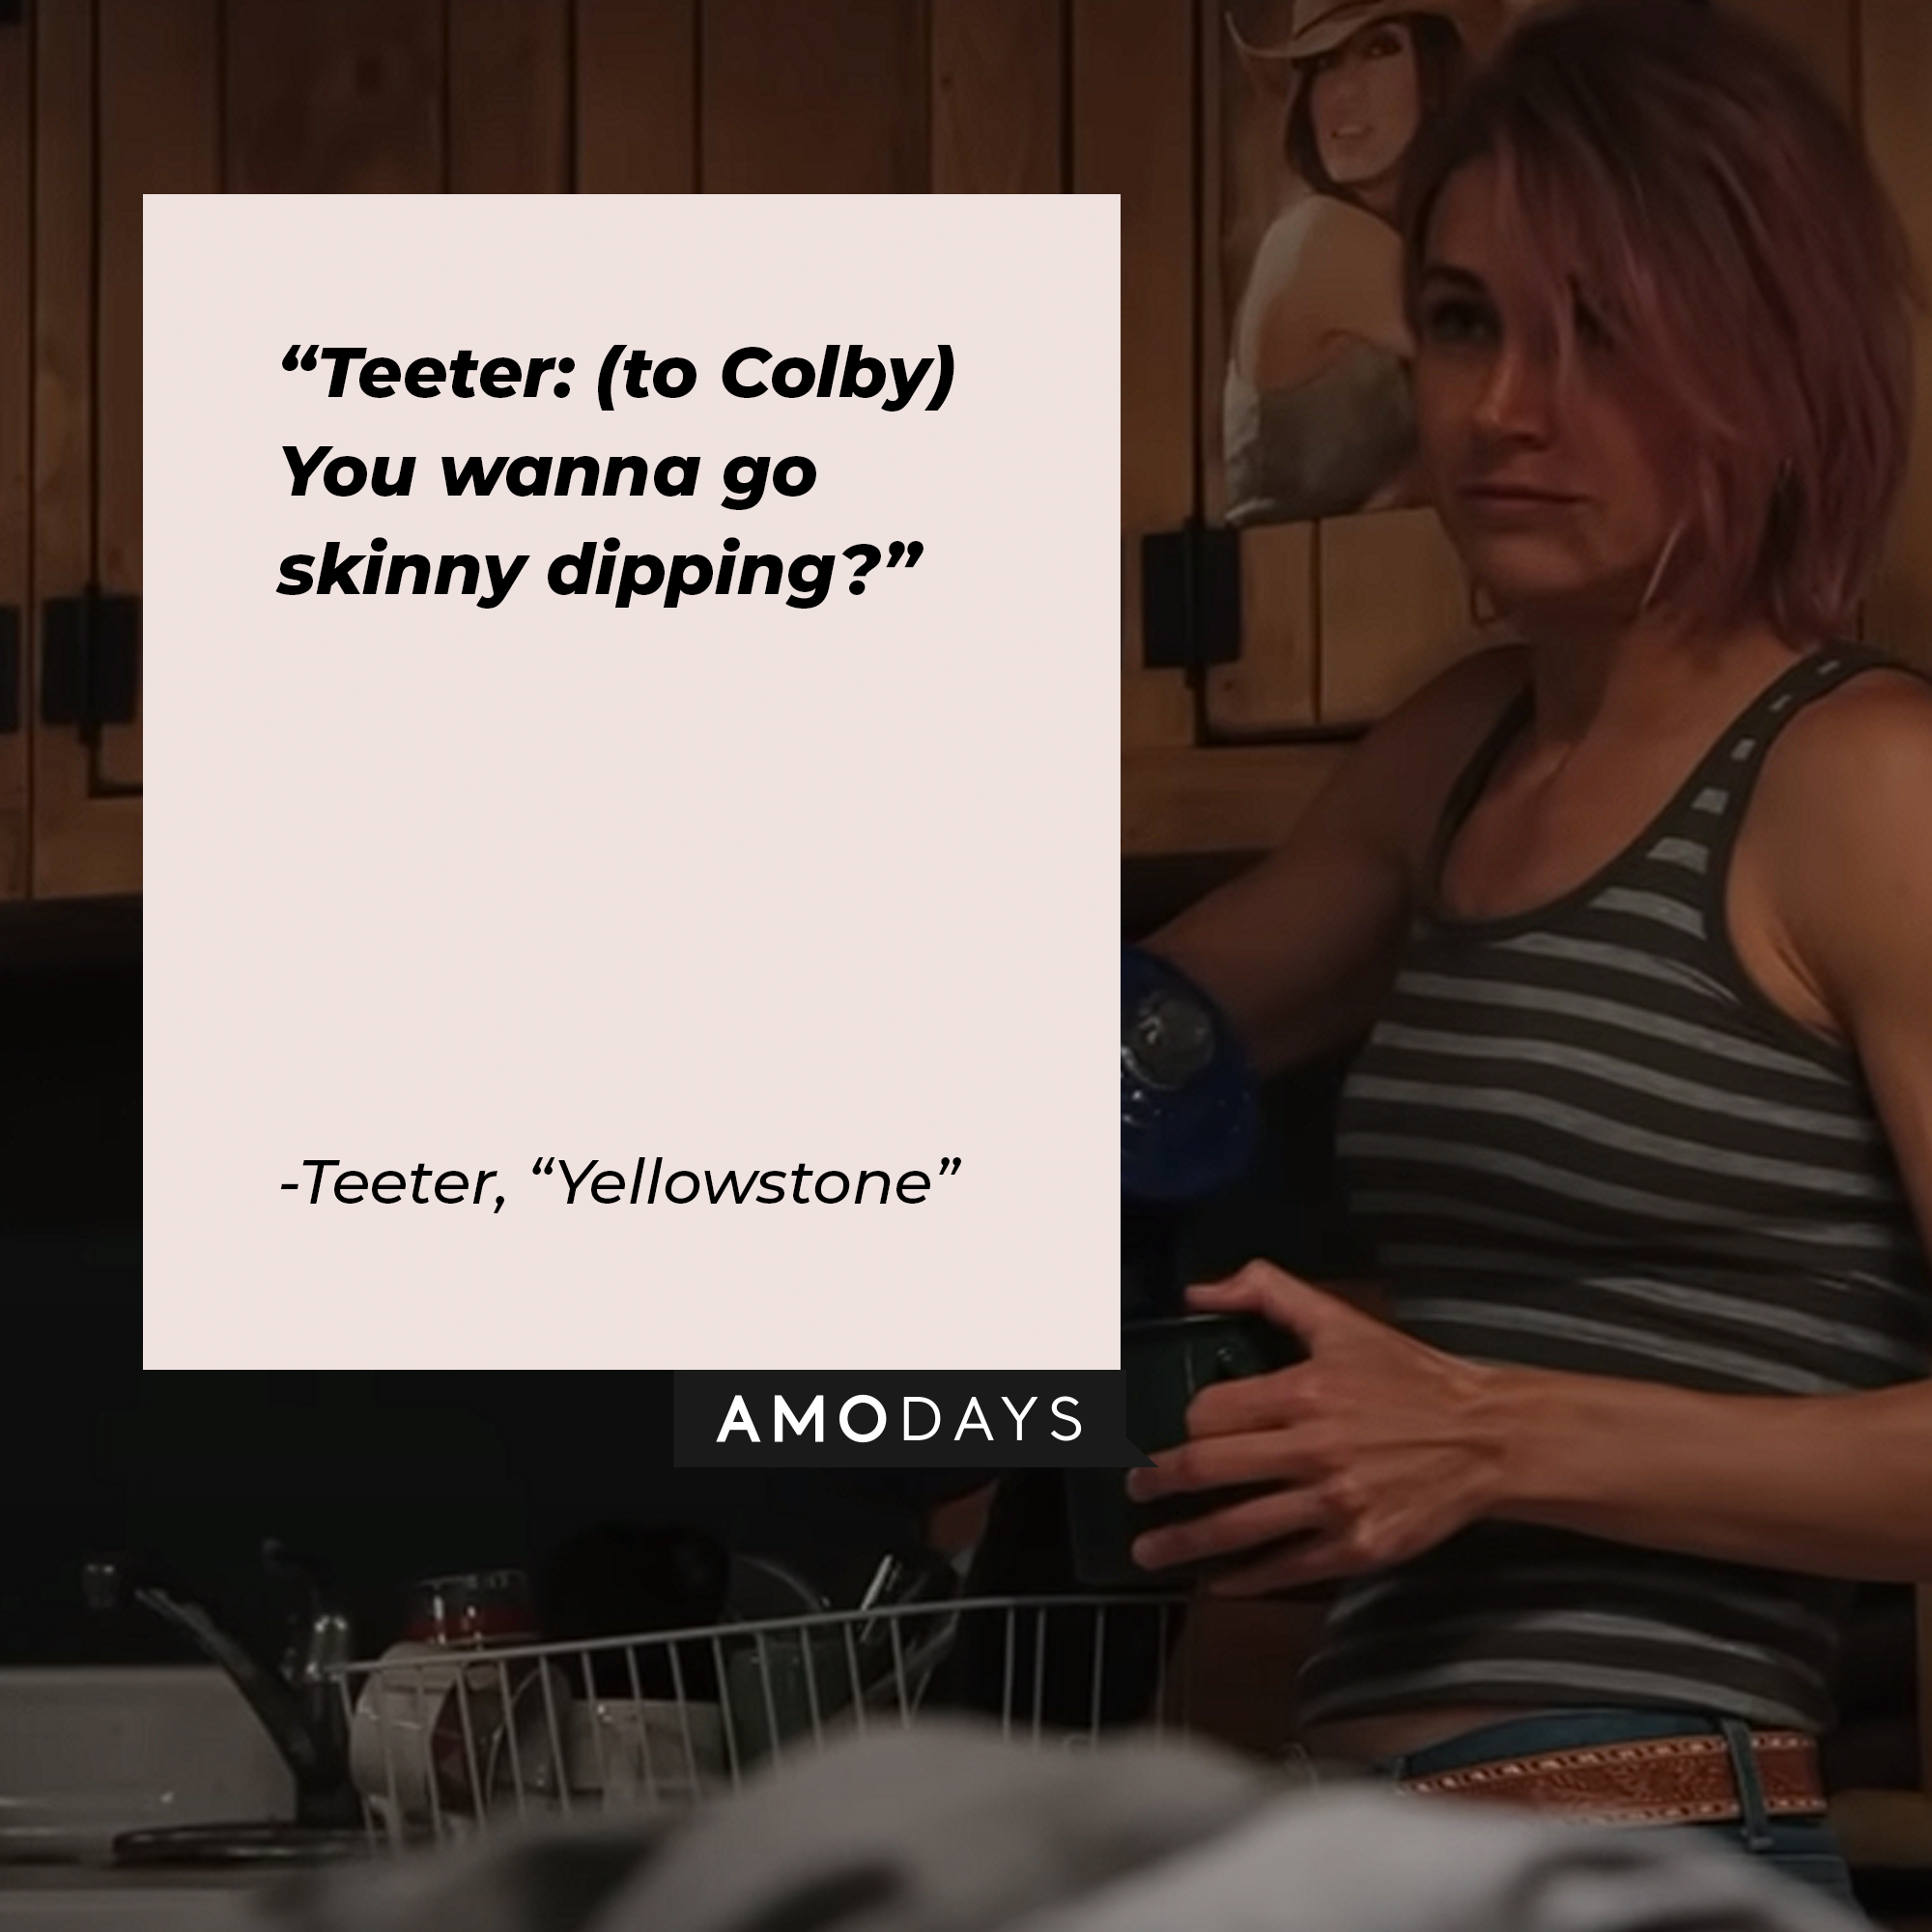 Teeter’s quote from “Yellowstone”: "Teeter: (to Colby) You wanna go skinny dipping?" | Source: youtube.com/yellowstone